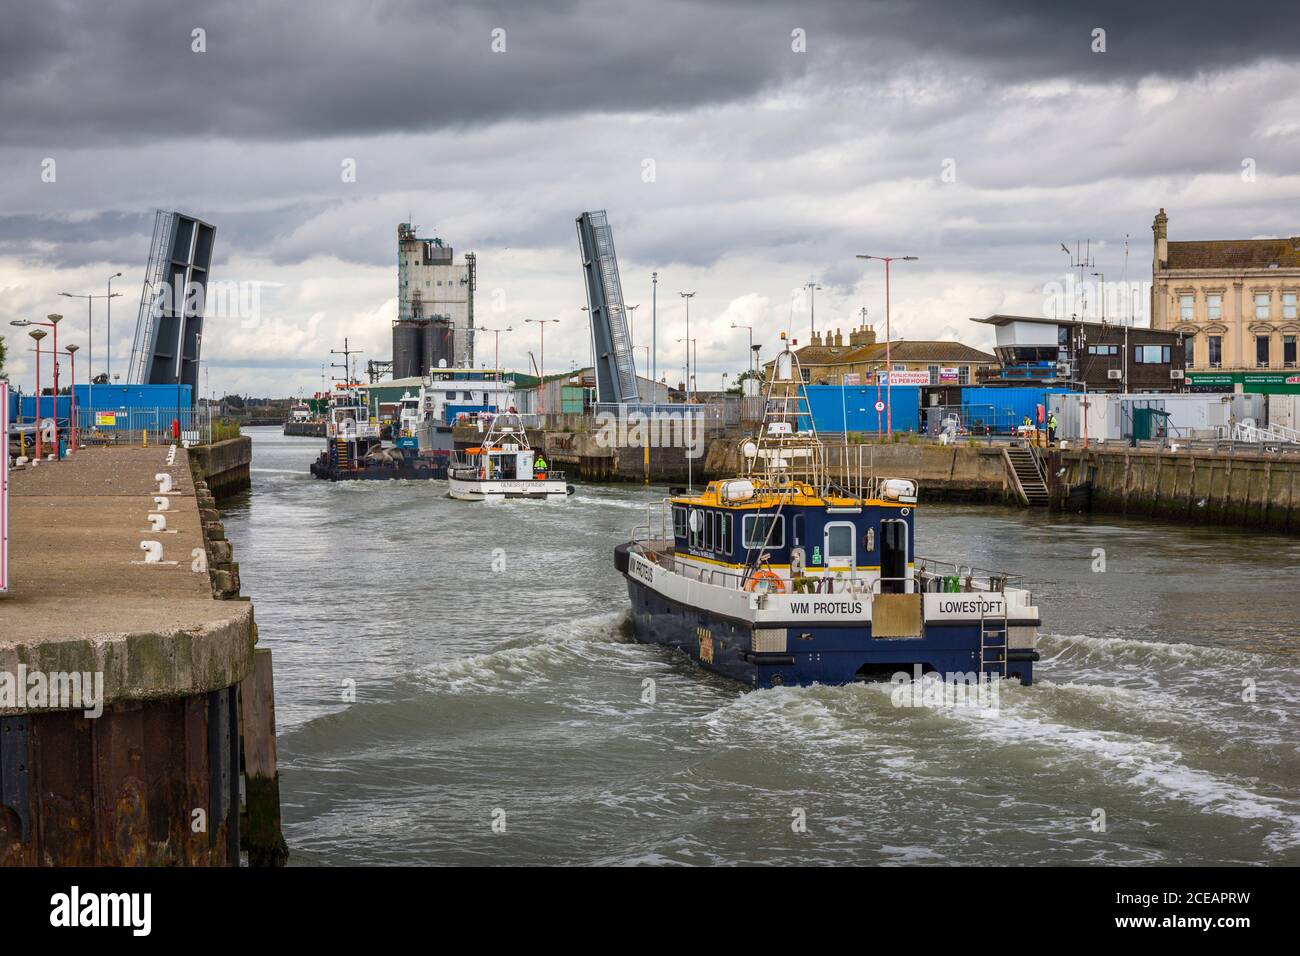 The Bascule Bridge at Lowestoft, Suffolk, UK, open to admit boats from The North Sea into Lowestoft Harbour and The River Waveney. Stock Photo